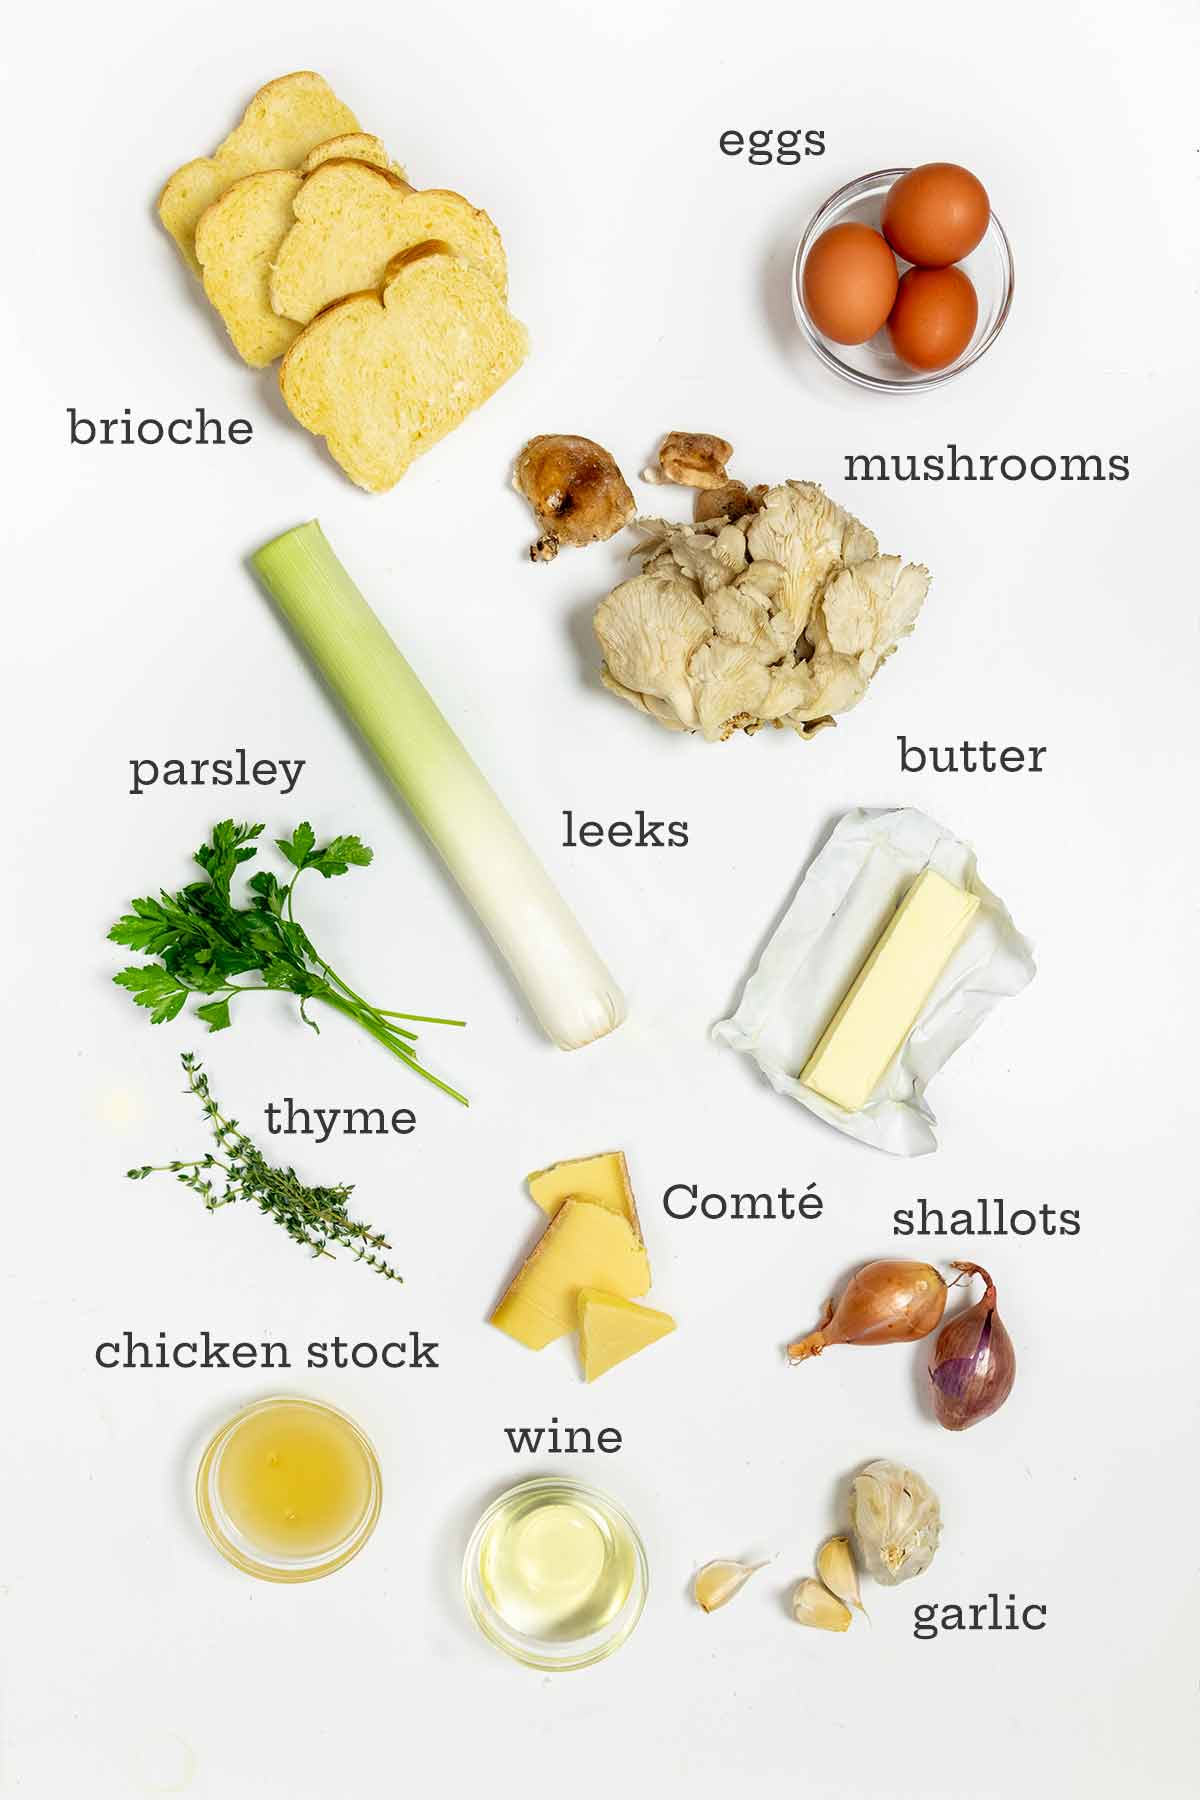 Ingredients for wild mushroom stuffing--bread, mushrooms, eggs, butter, cheese, herbs, shallots, garlic, stock, and wine.